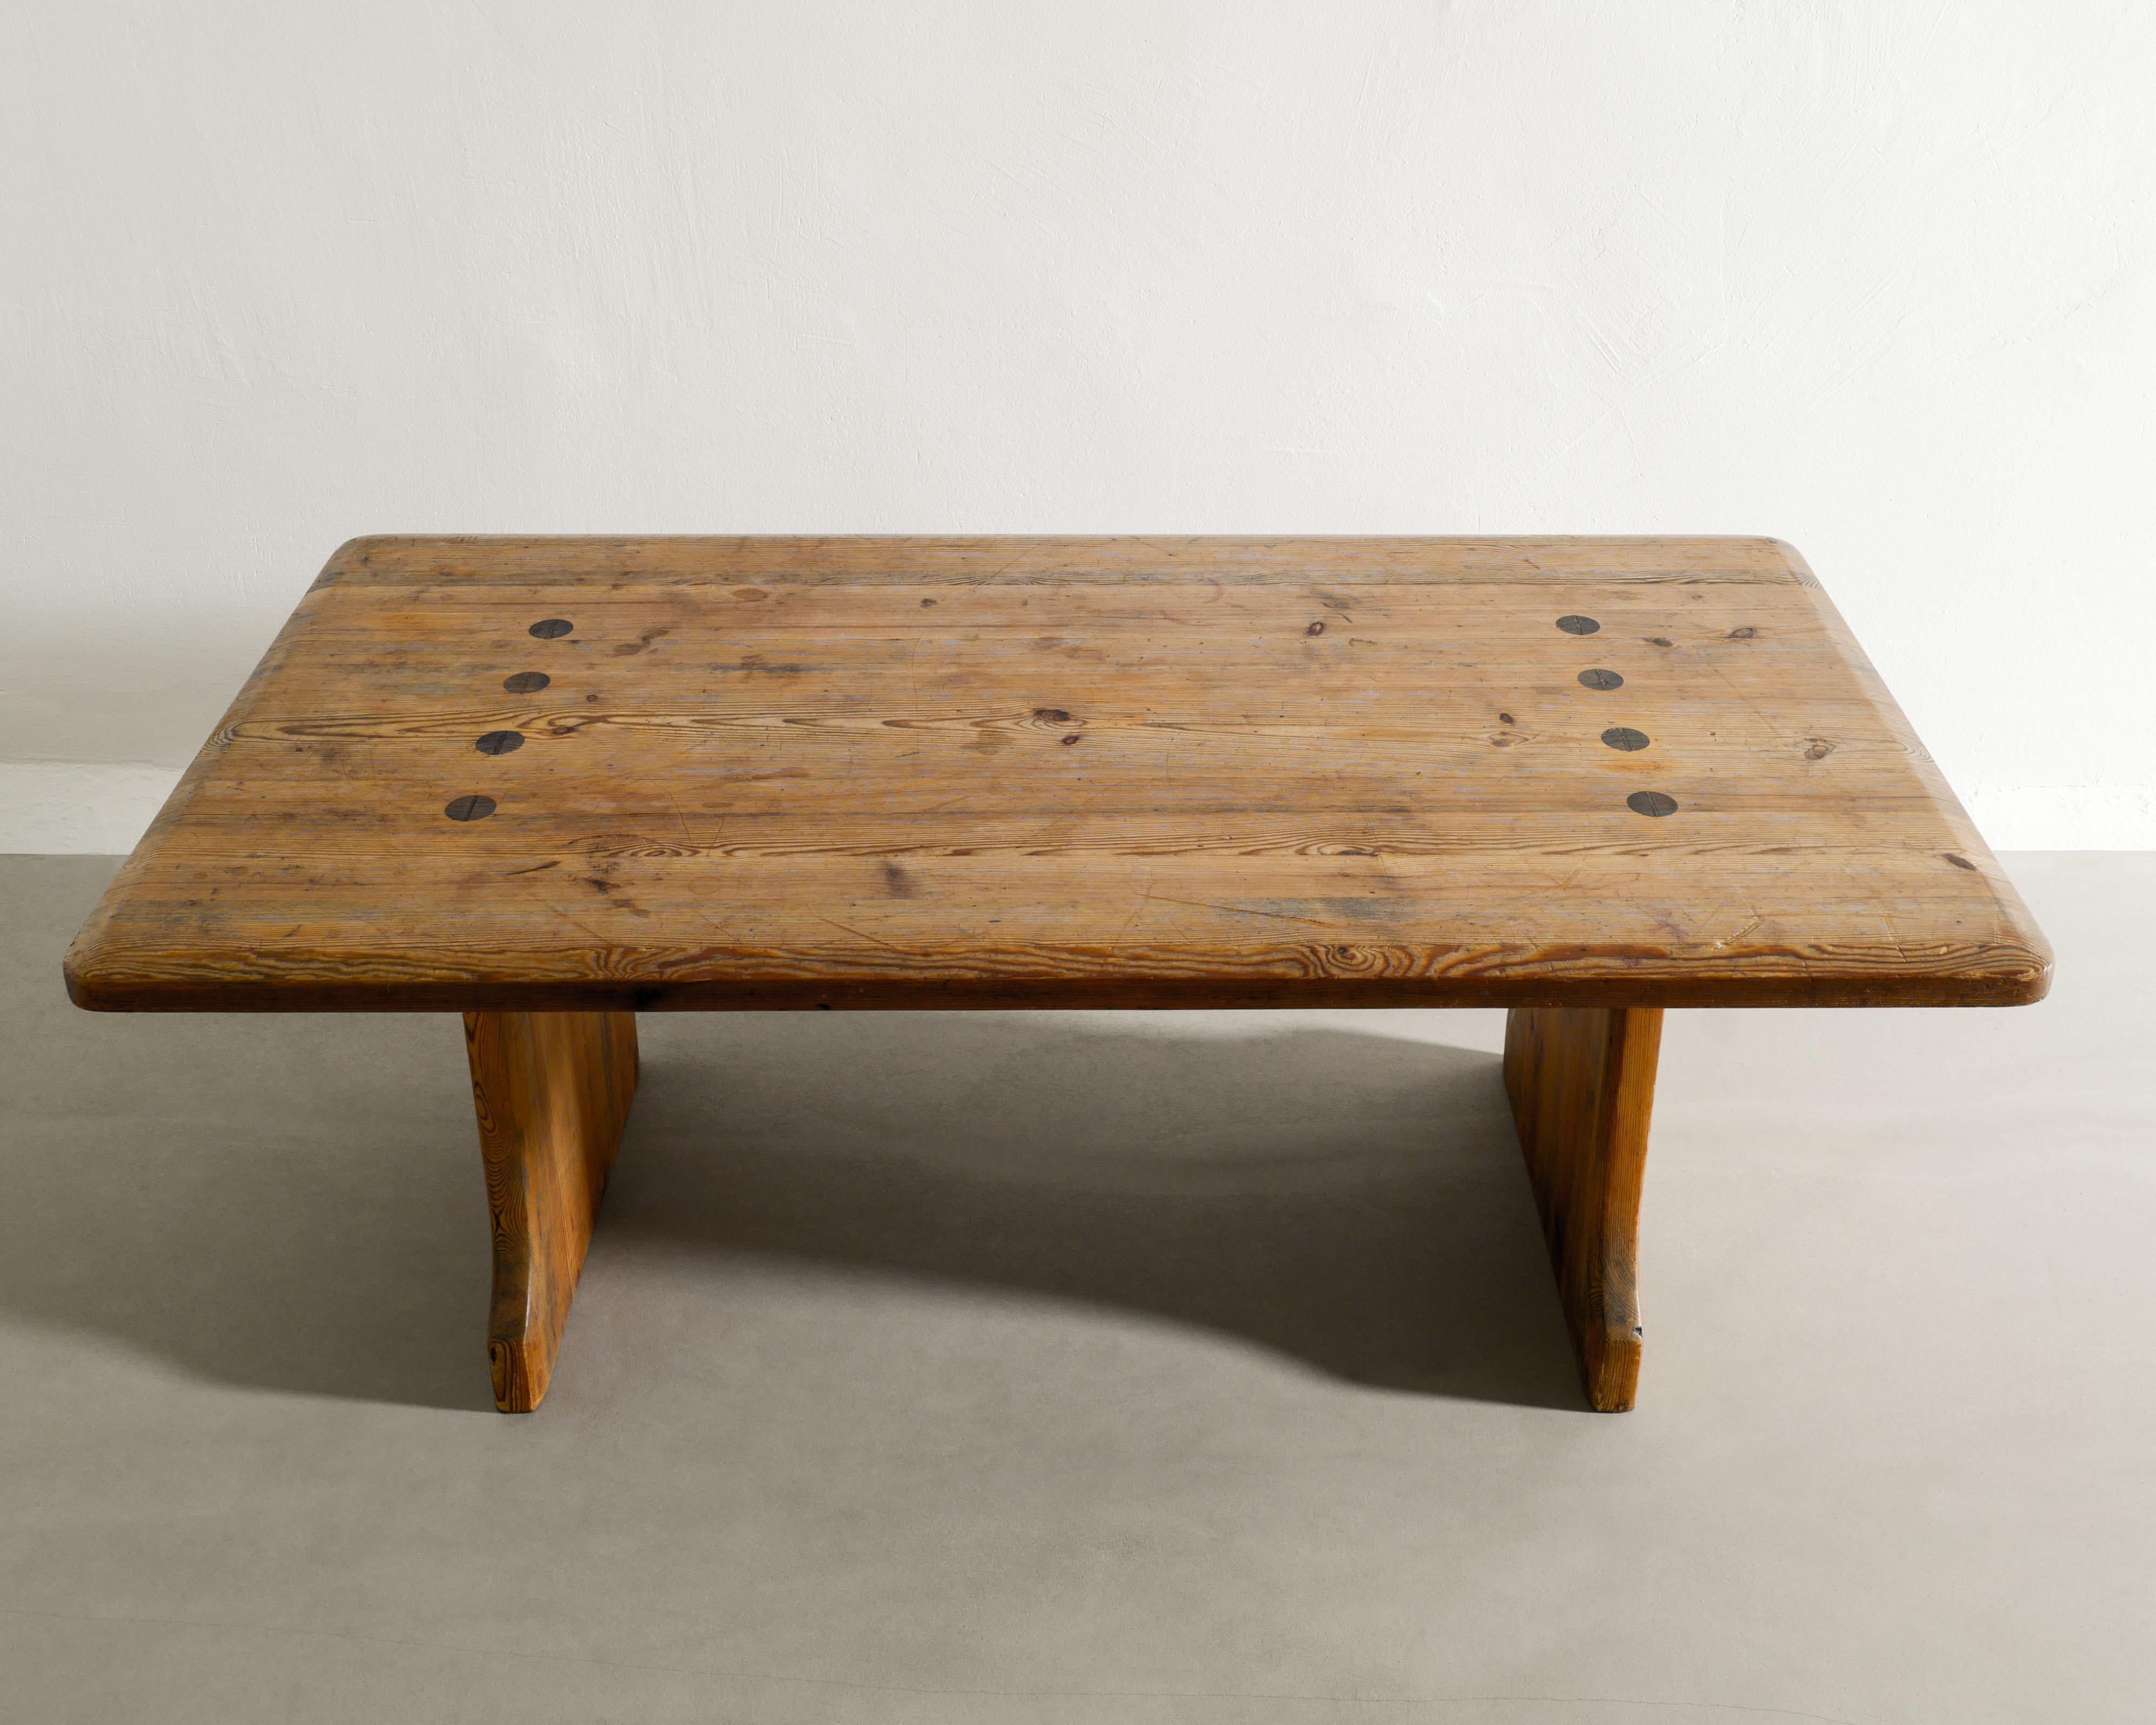 Swedish Rustic Wooden Cabin Coffee Sofa Table in Solid Pine Produced, 1930s  For Sale 2